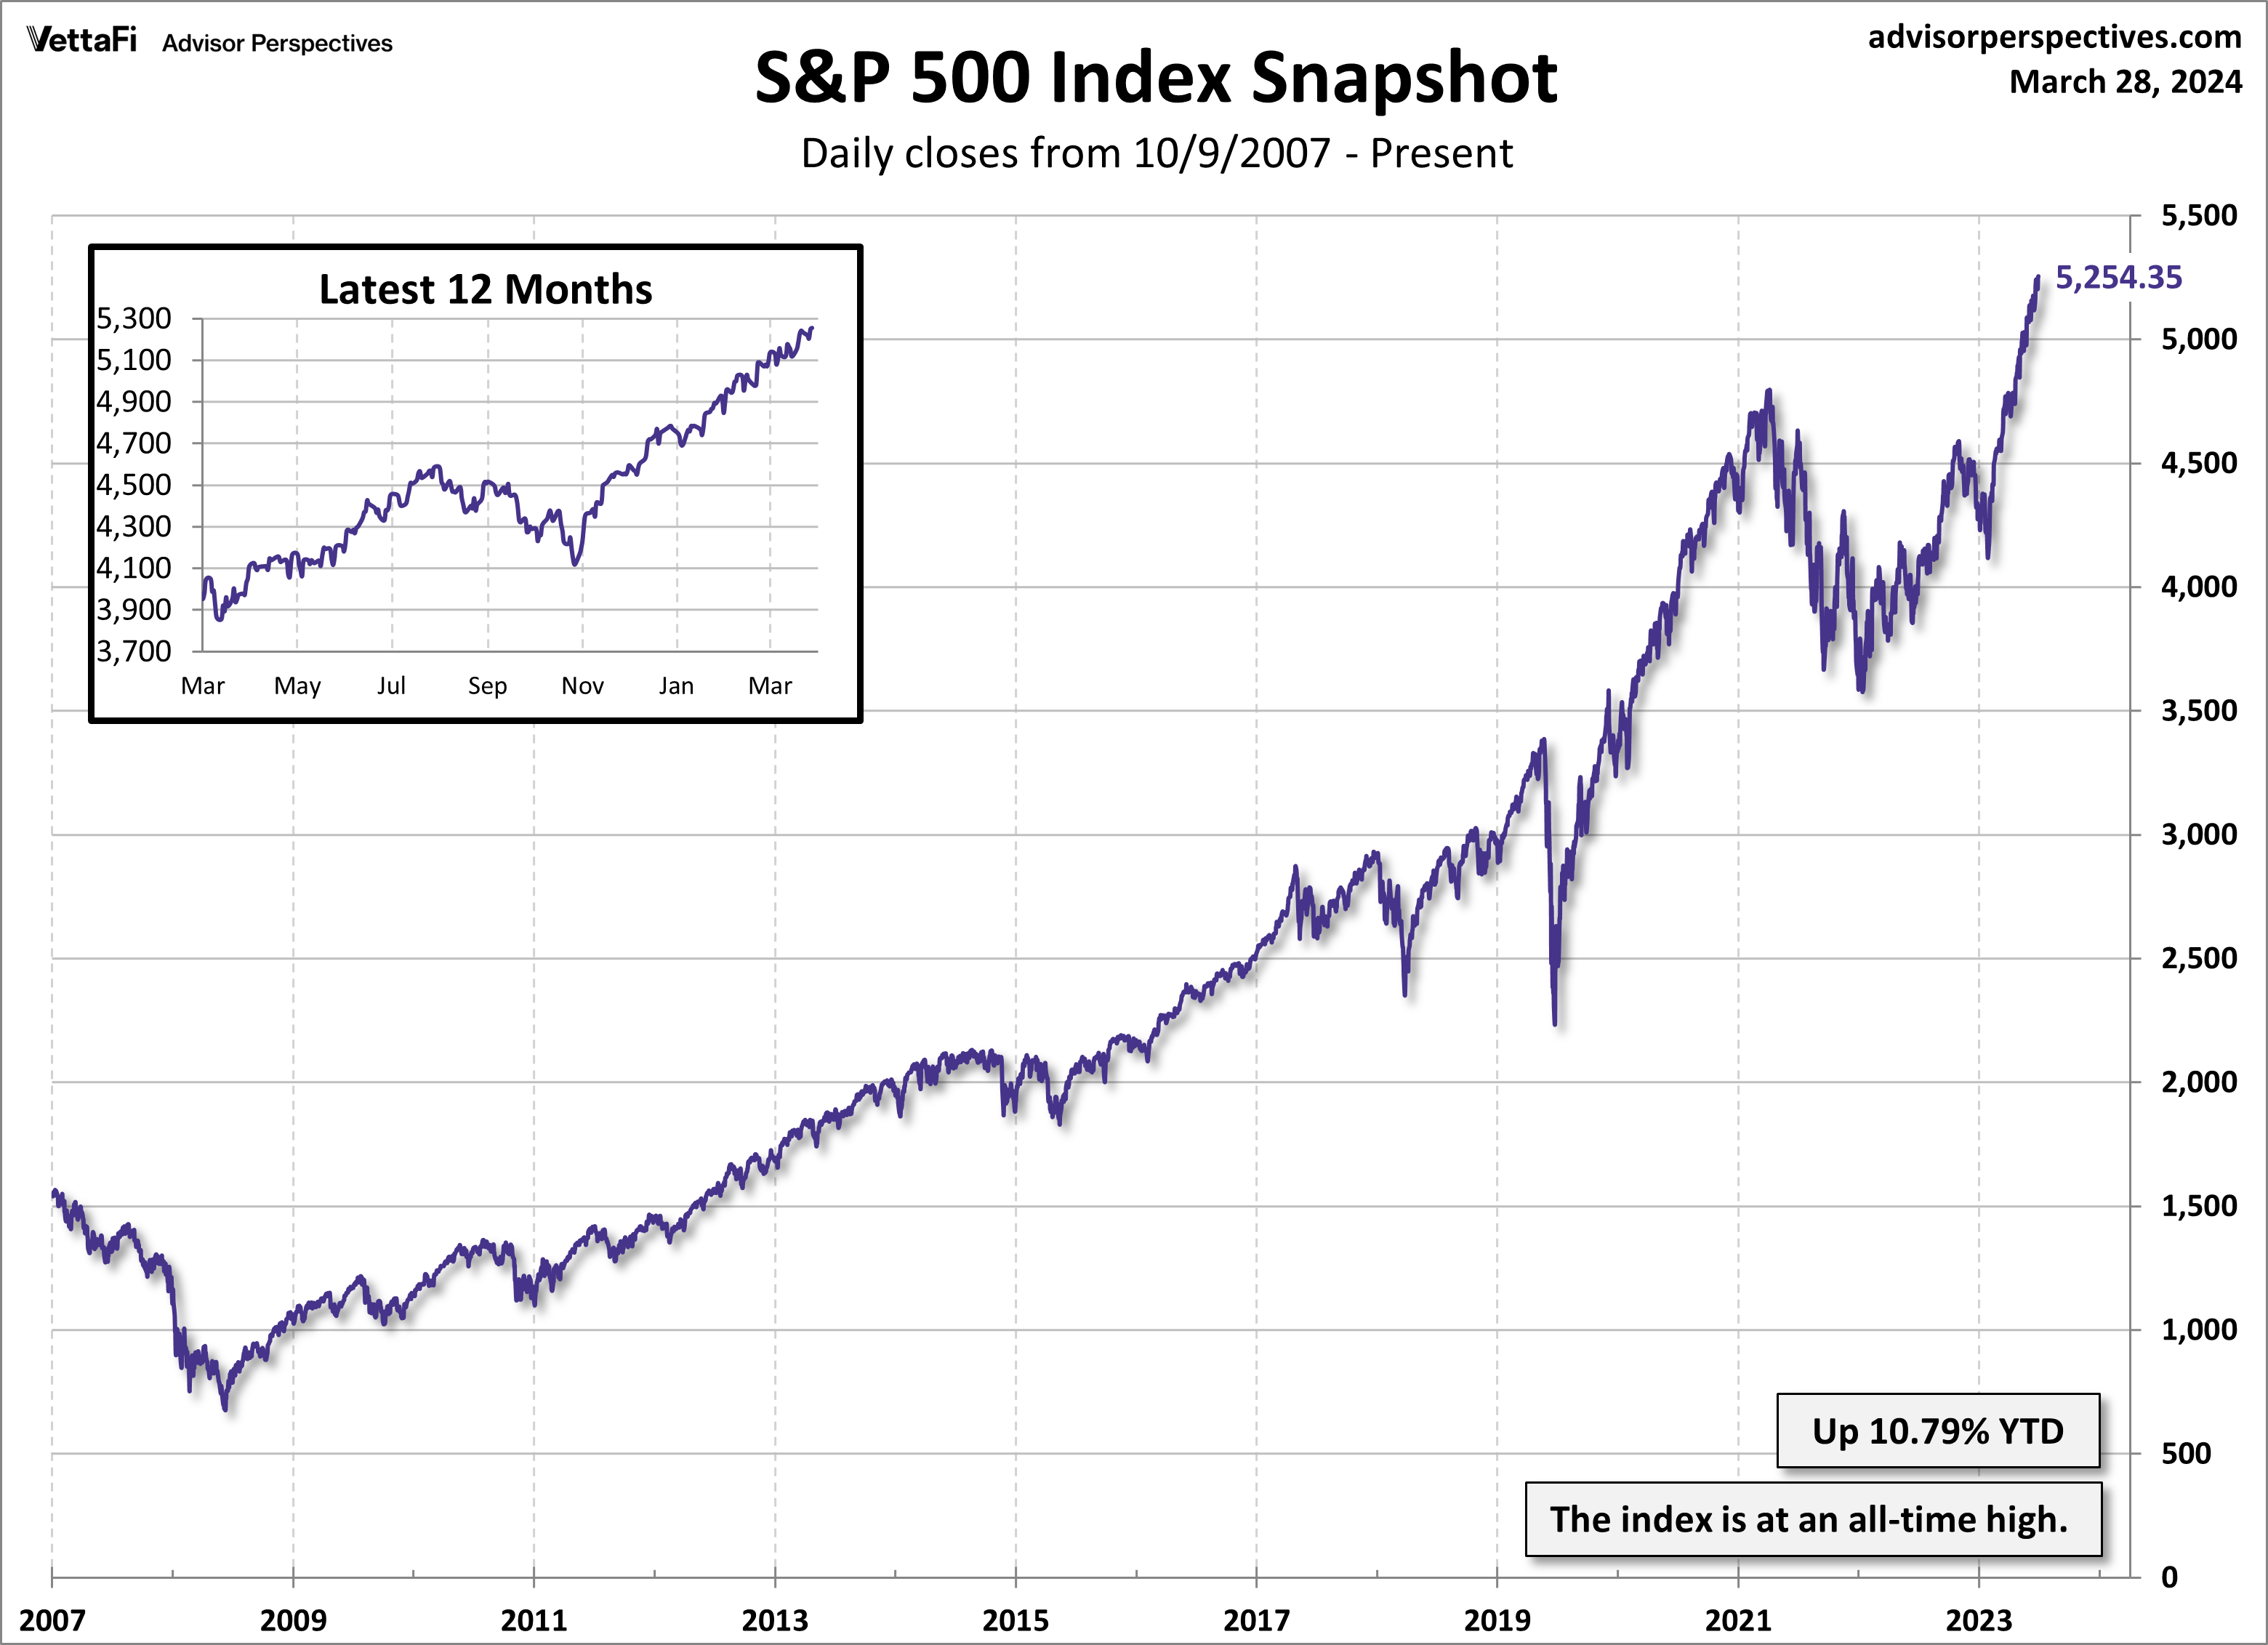 S&P 500 Index Snapshot Daily closes from 10_9_2007 - Present